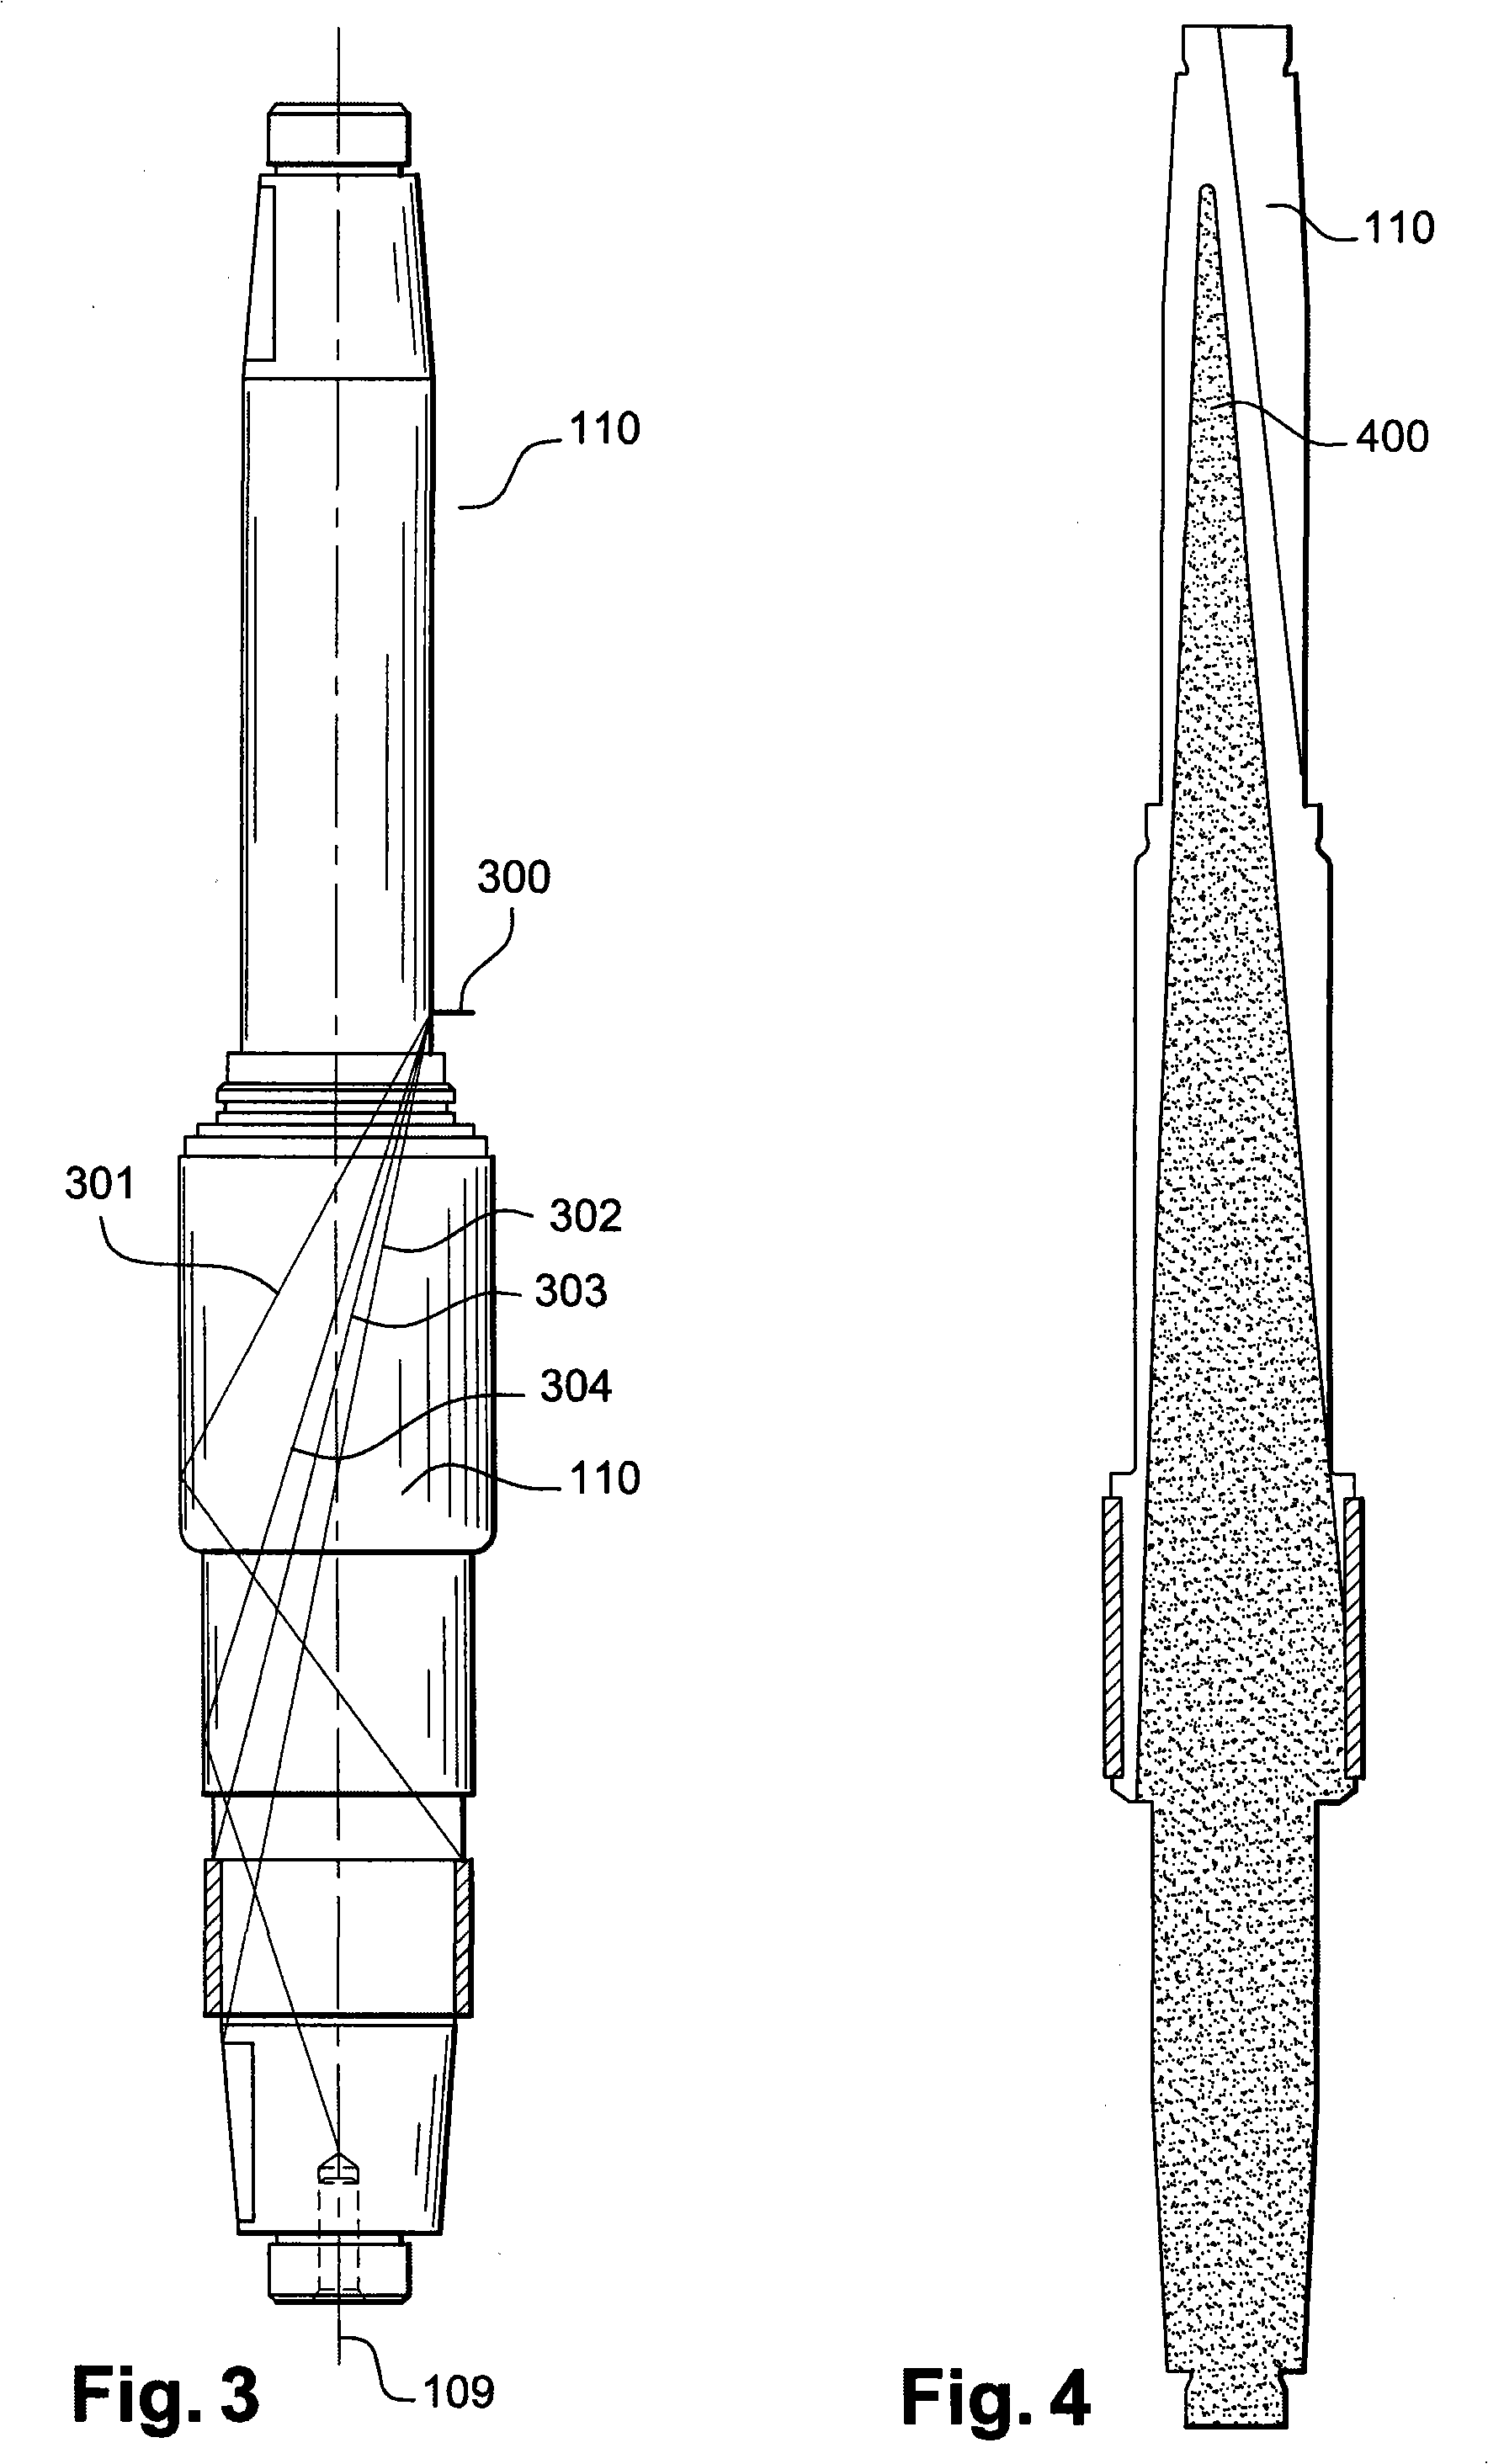 Method for inspecting the state of a rotating machine drive shaft